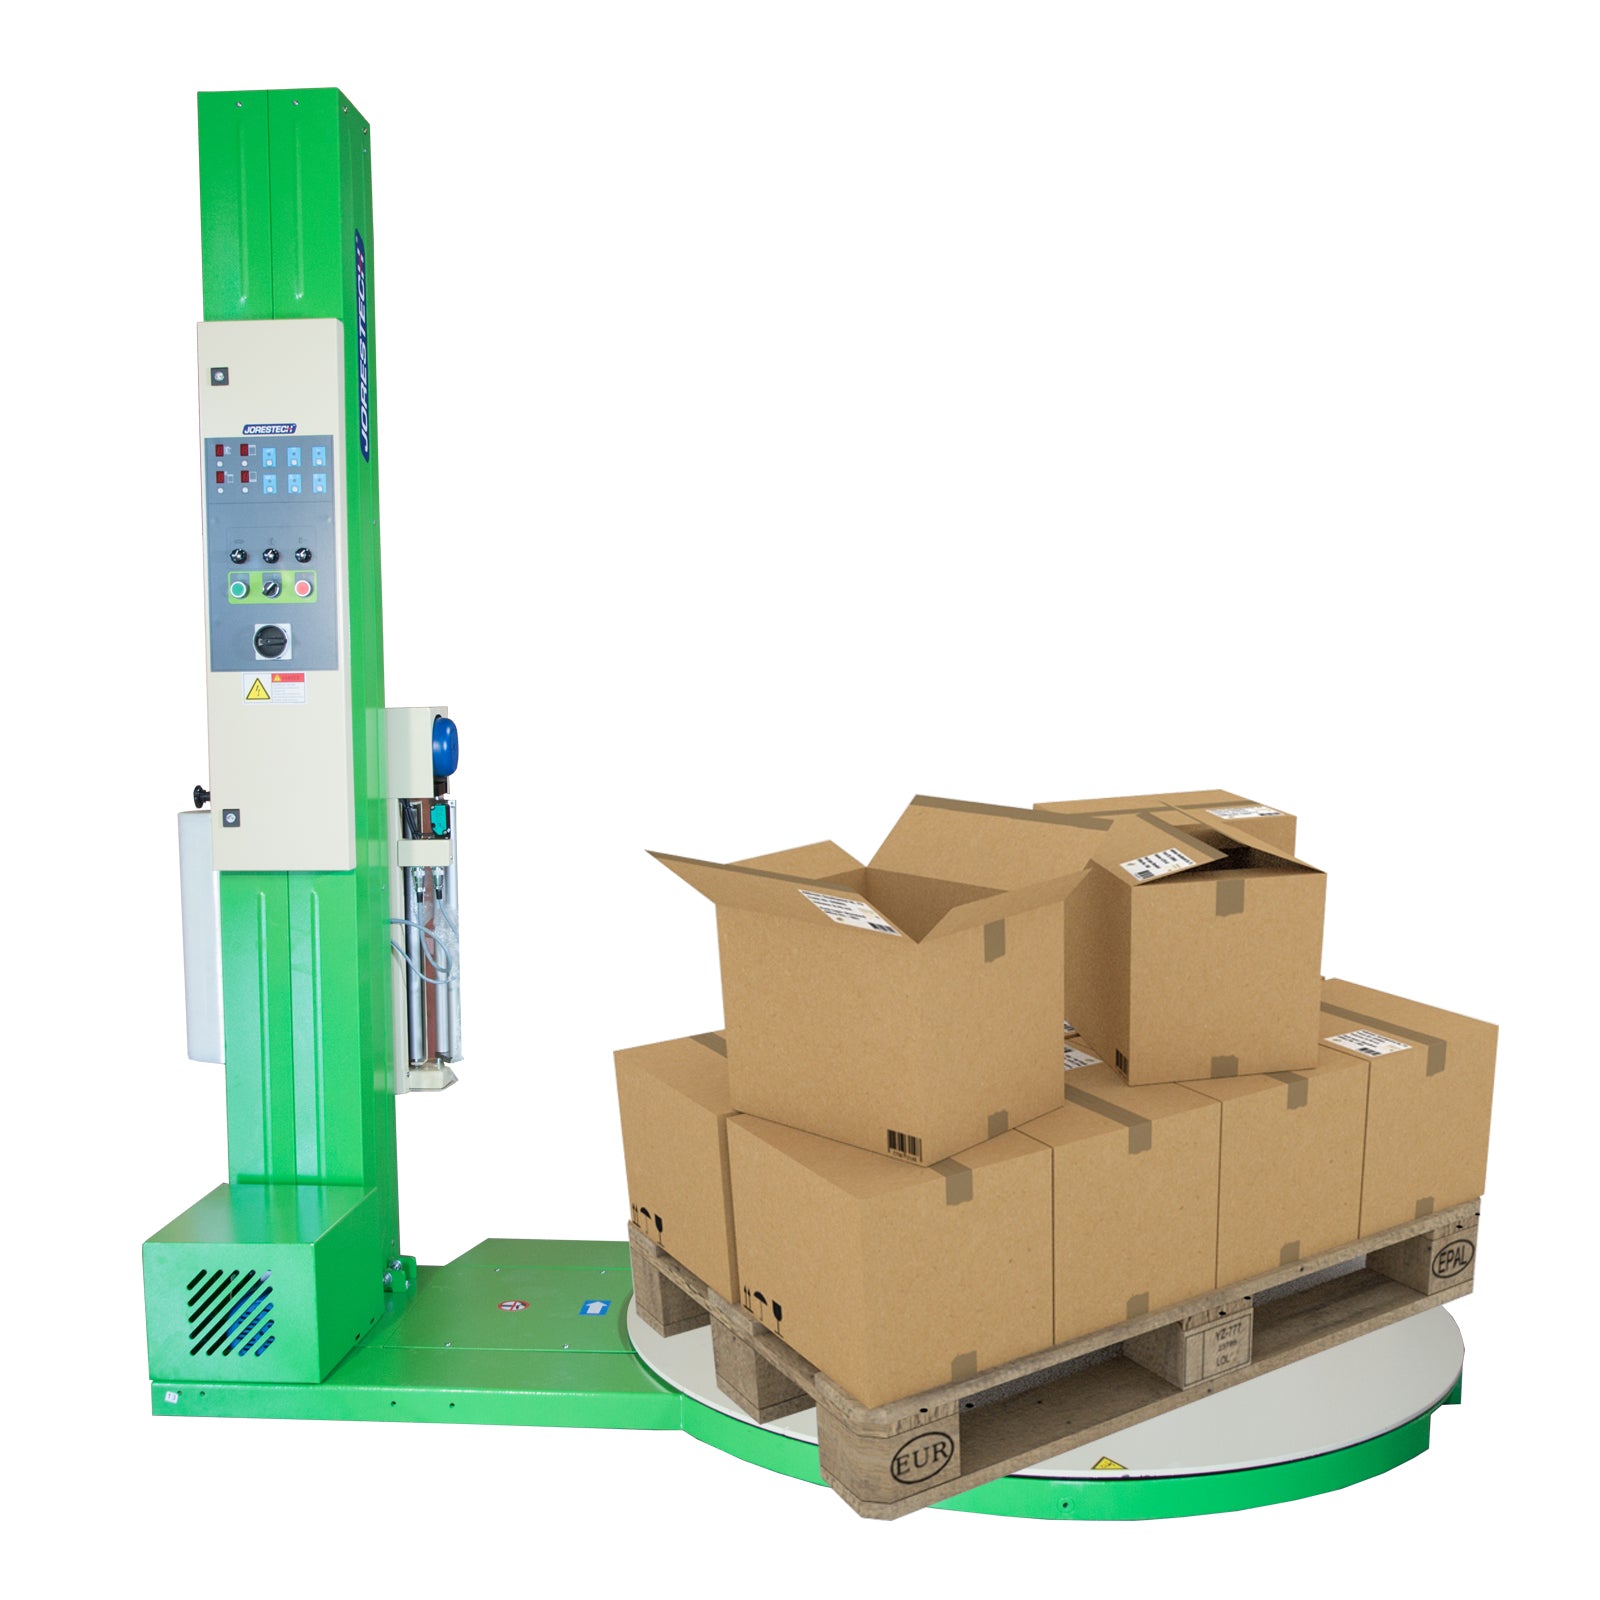 Green pallet stretch wrapper. The stretch wrapper is loaded with a pallet that sits on the machine's turntable with boxes on stop. The pallet is being prepared to be stretch wrapped and bundled. 